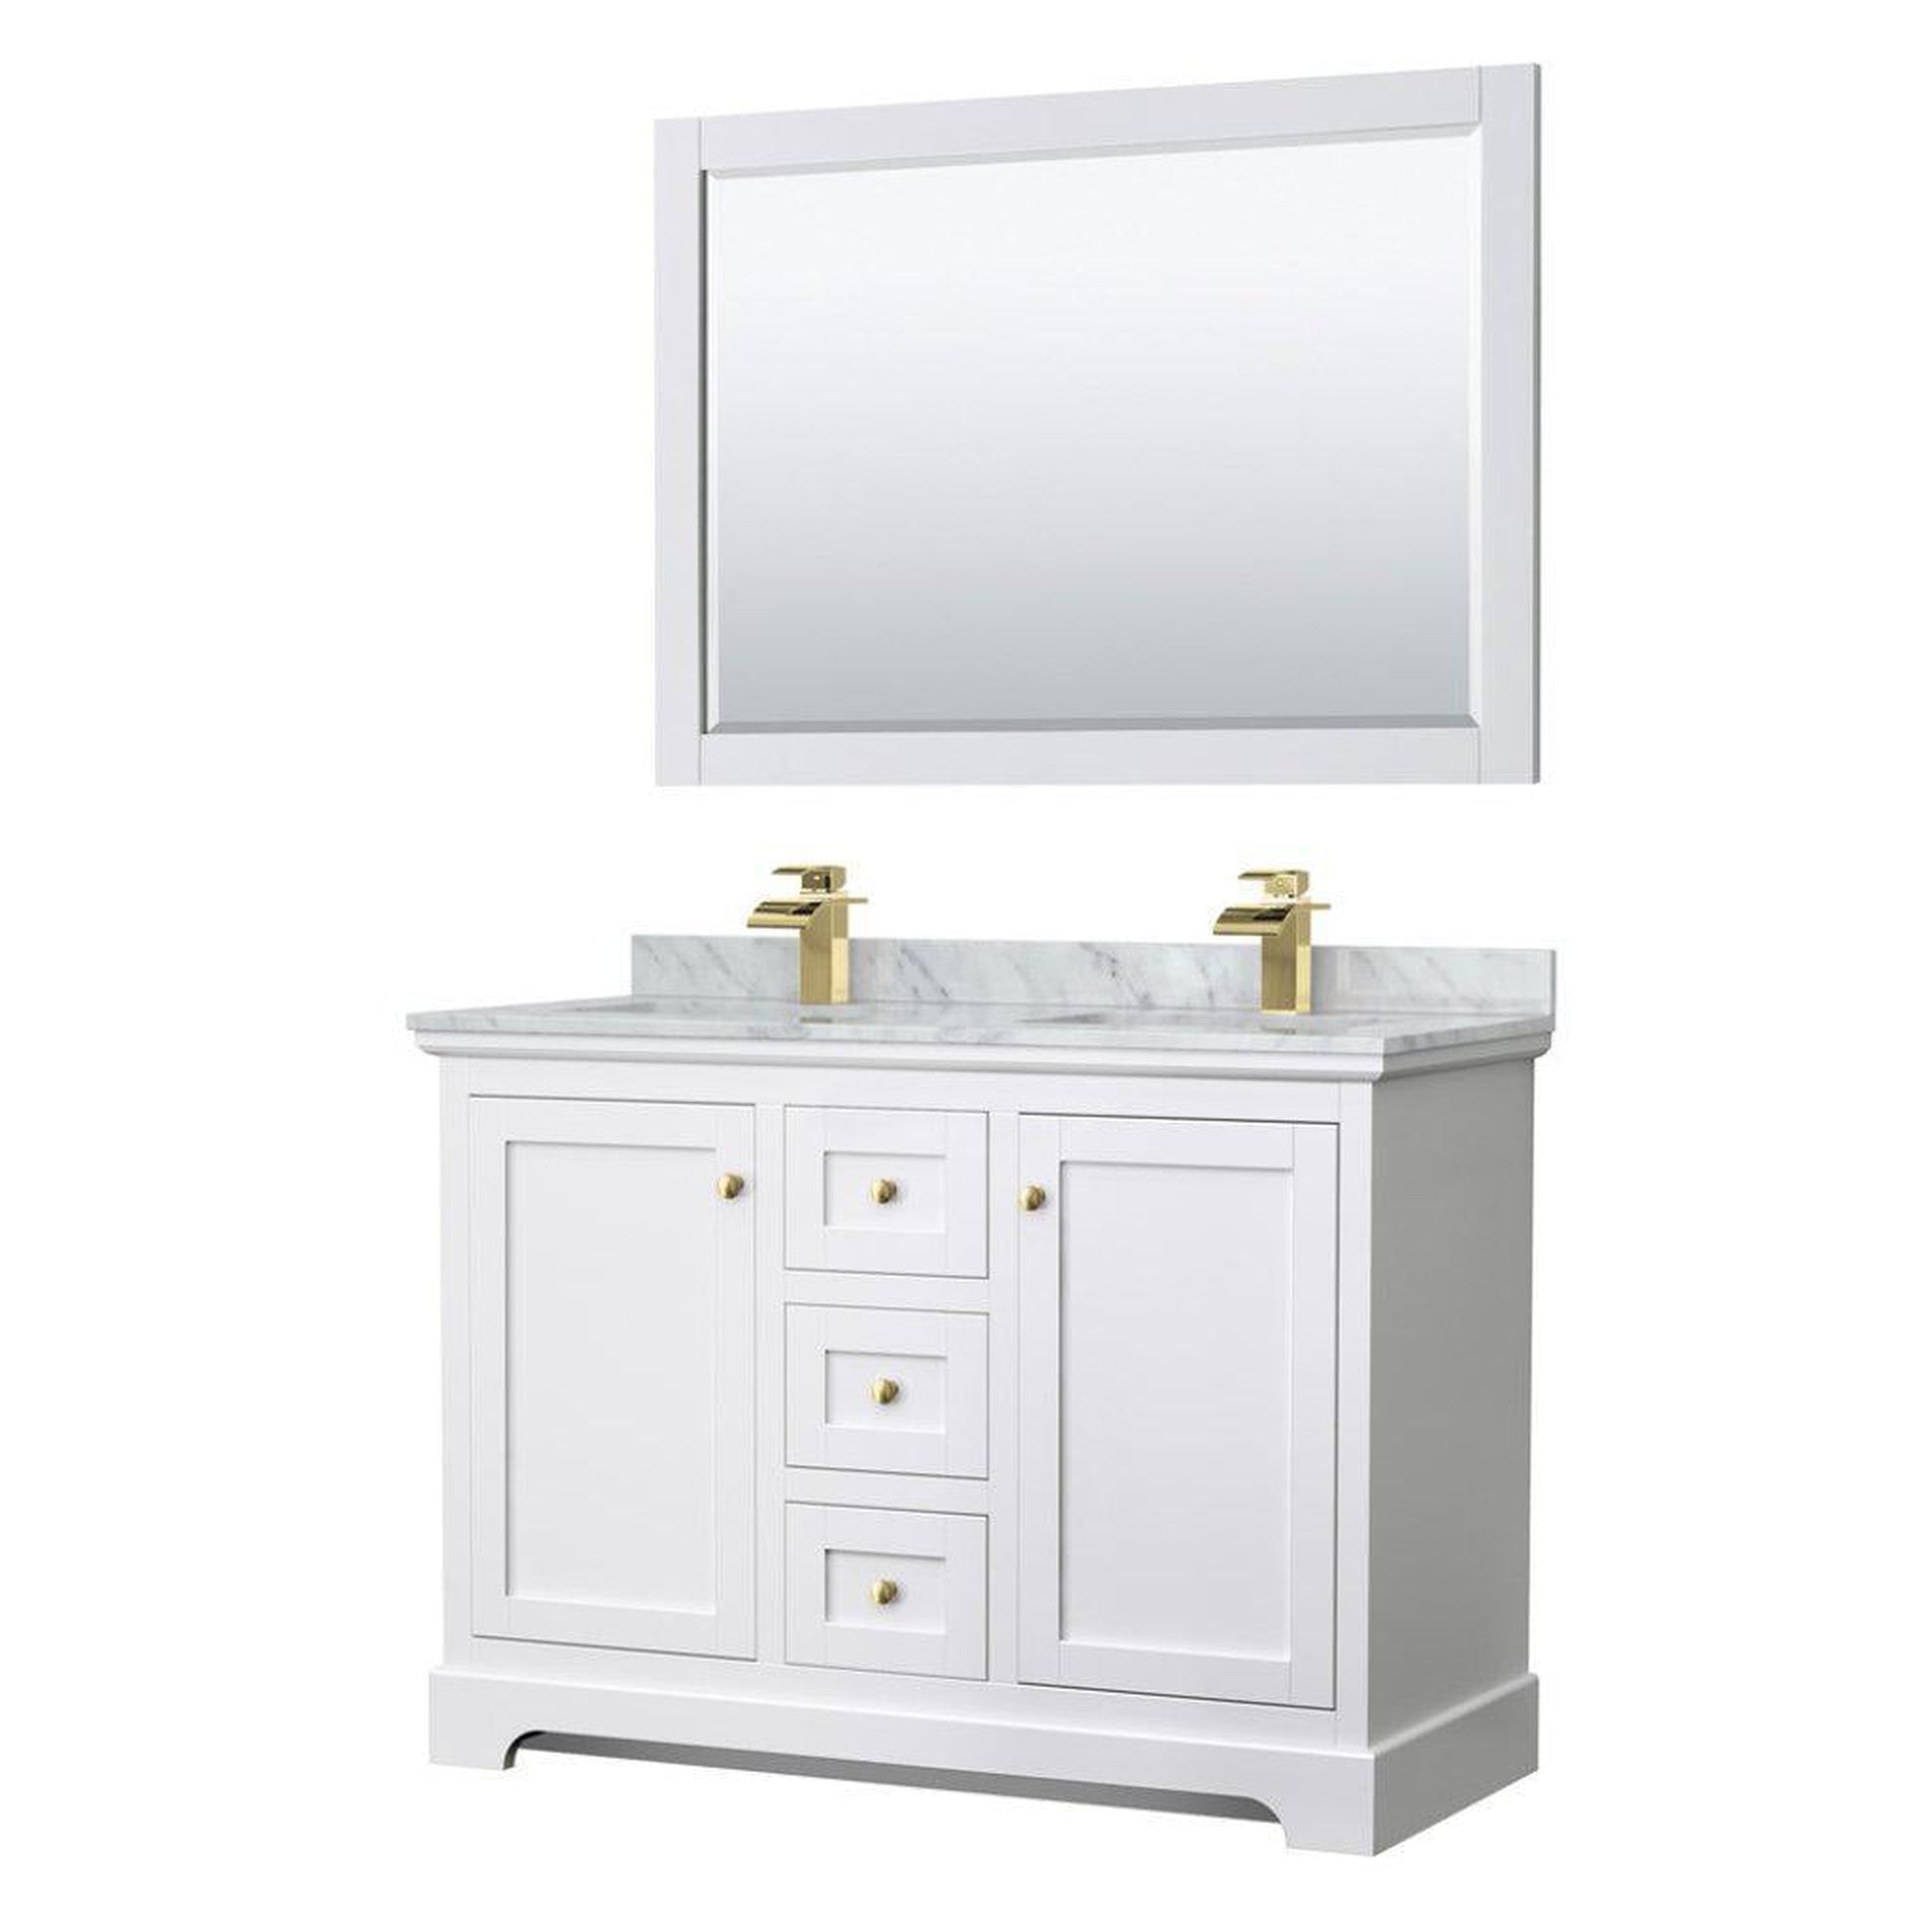 Wyndham Collection Avery 48" White Double Bathroom Vanity Set, White Carrara Marble Countertop With 1-Hole Faucet, Square Sink, 46" Mirror, Gold Trims